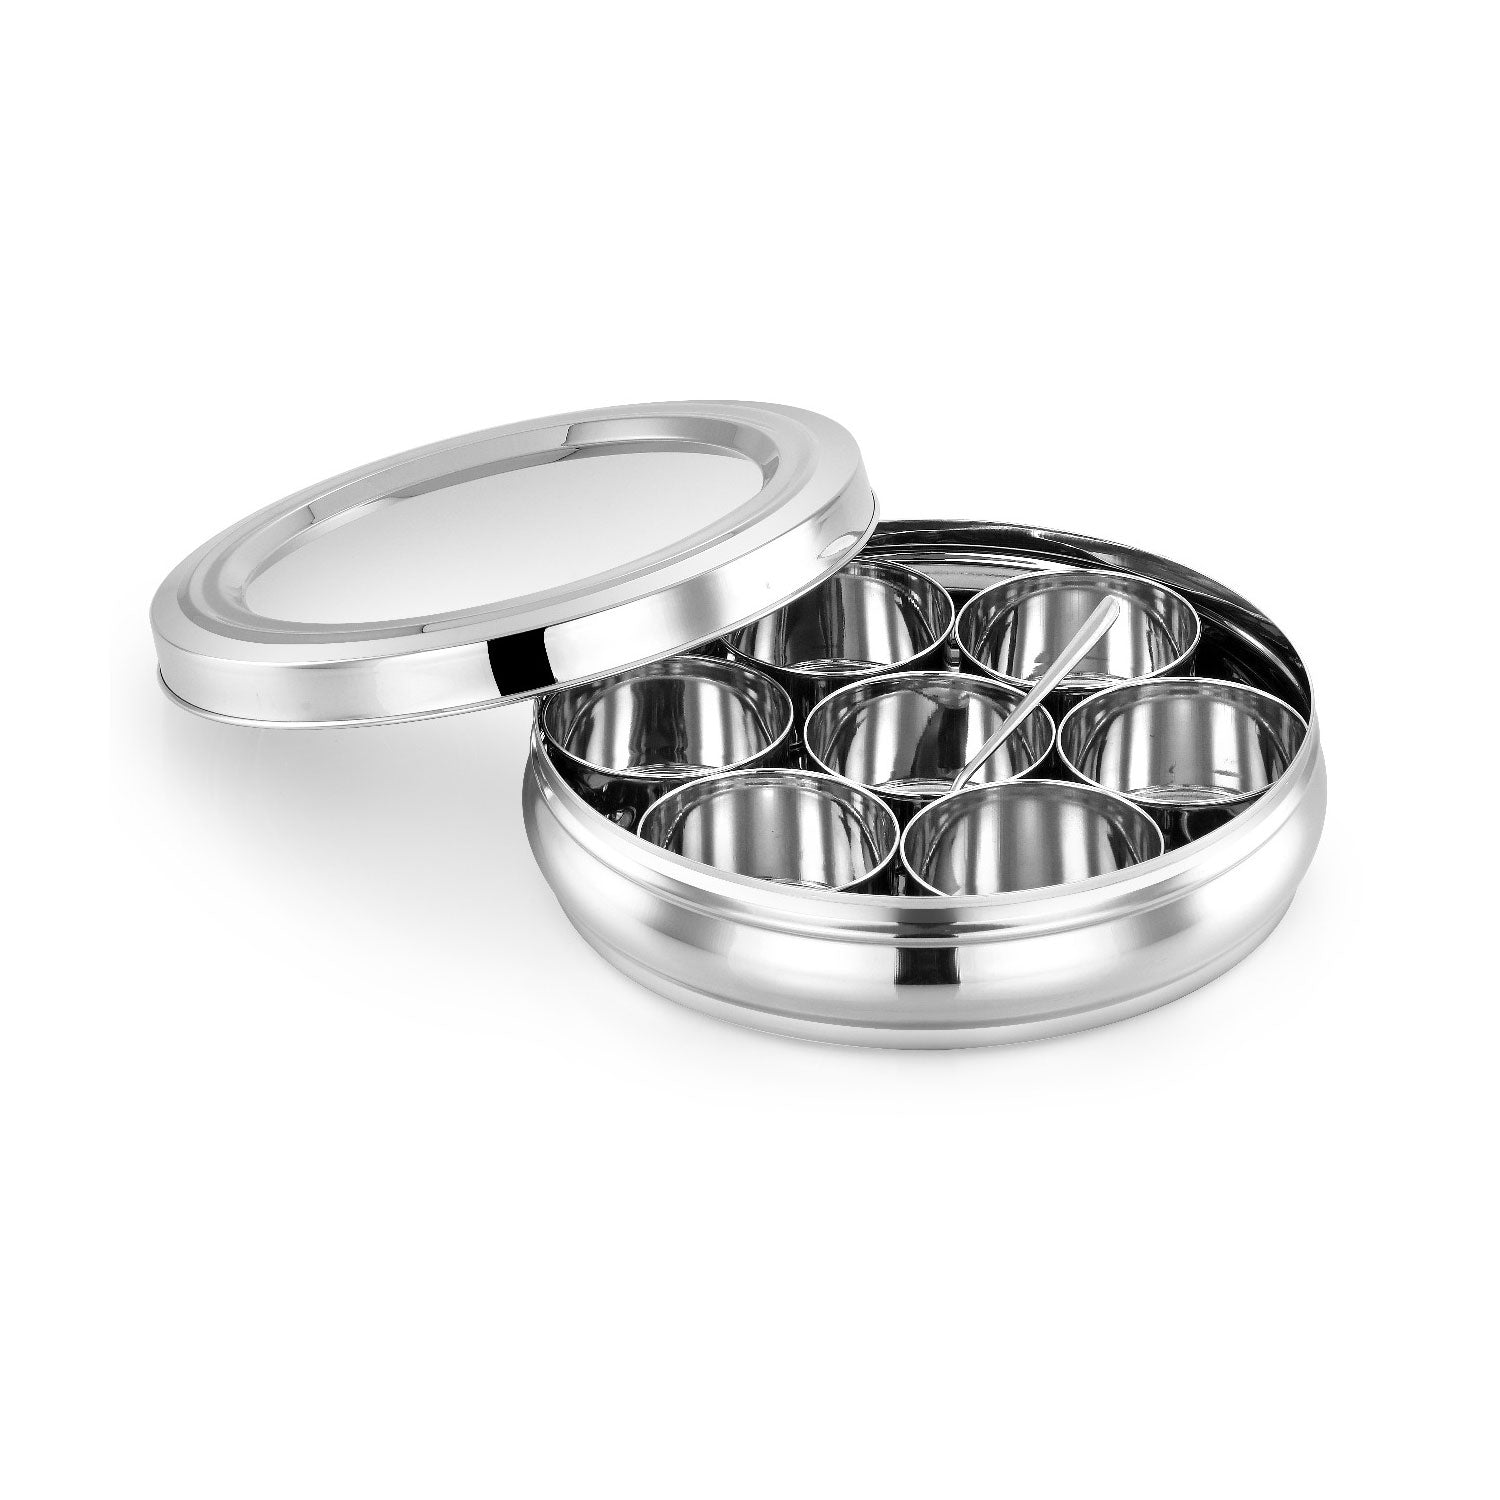 AVIAS Stainless steel Deluxe Spice box with See-through lid open